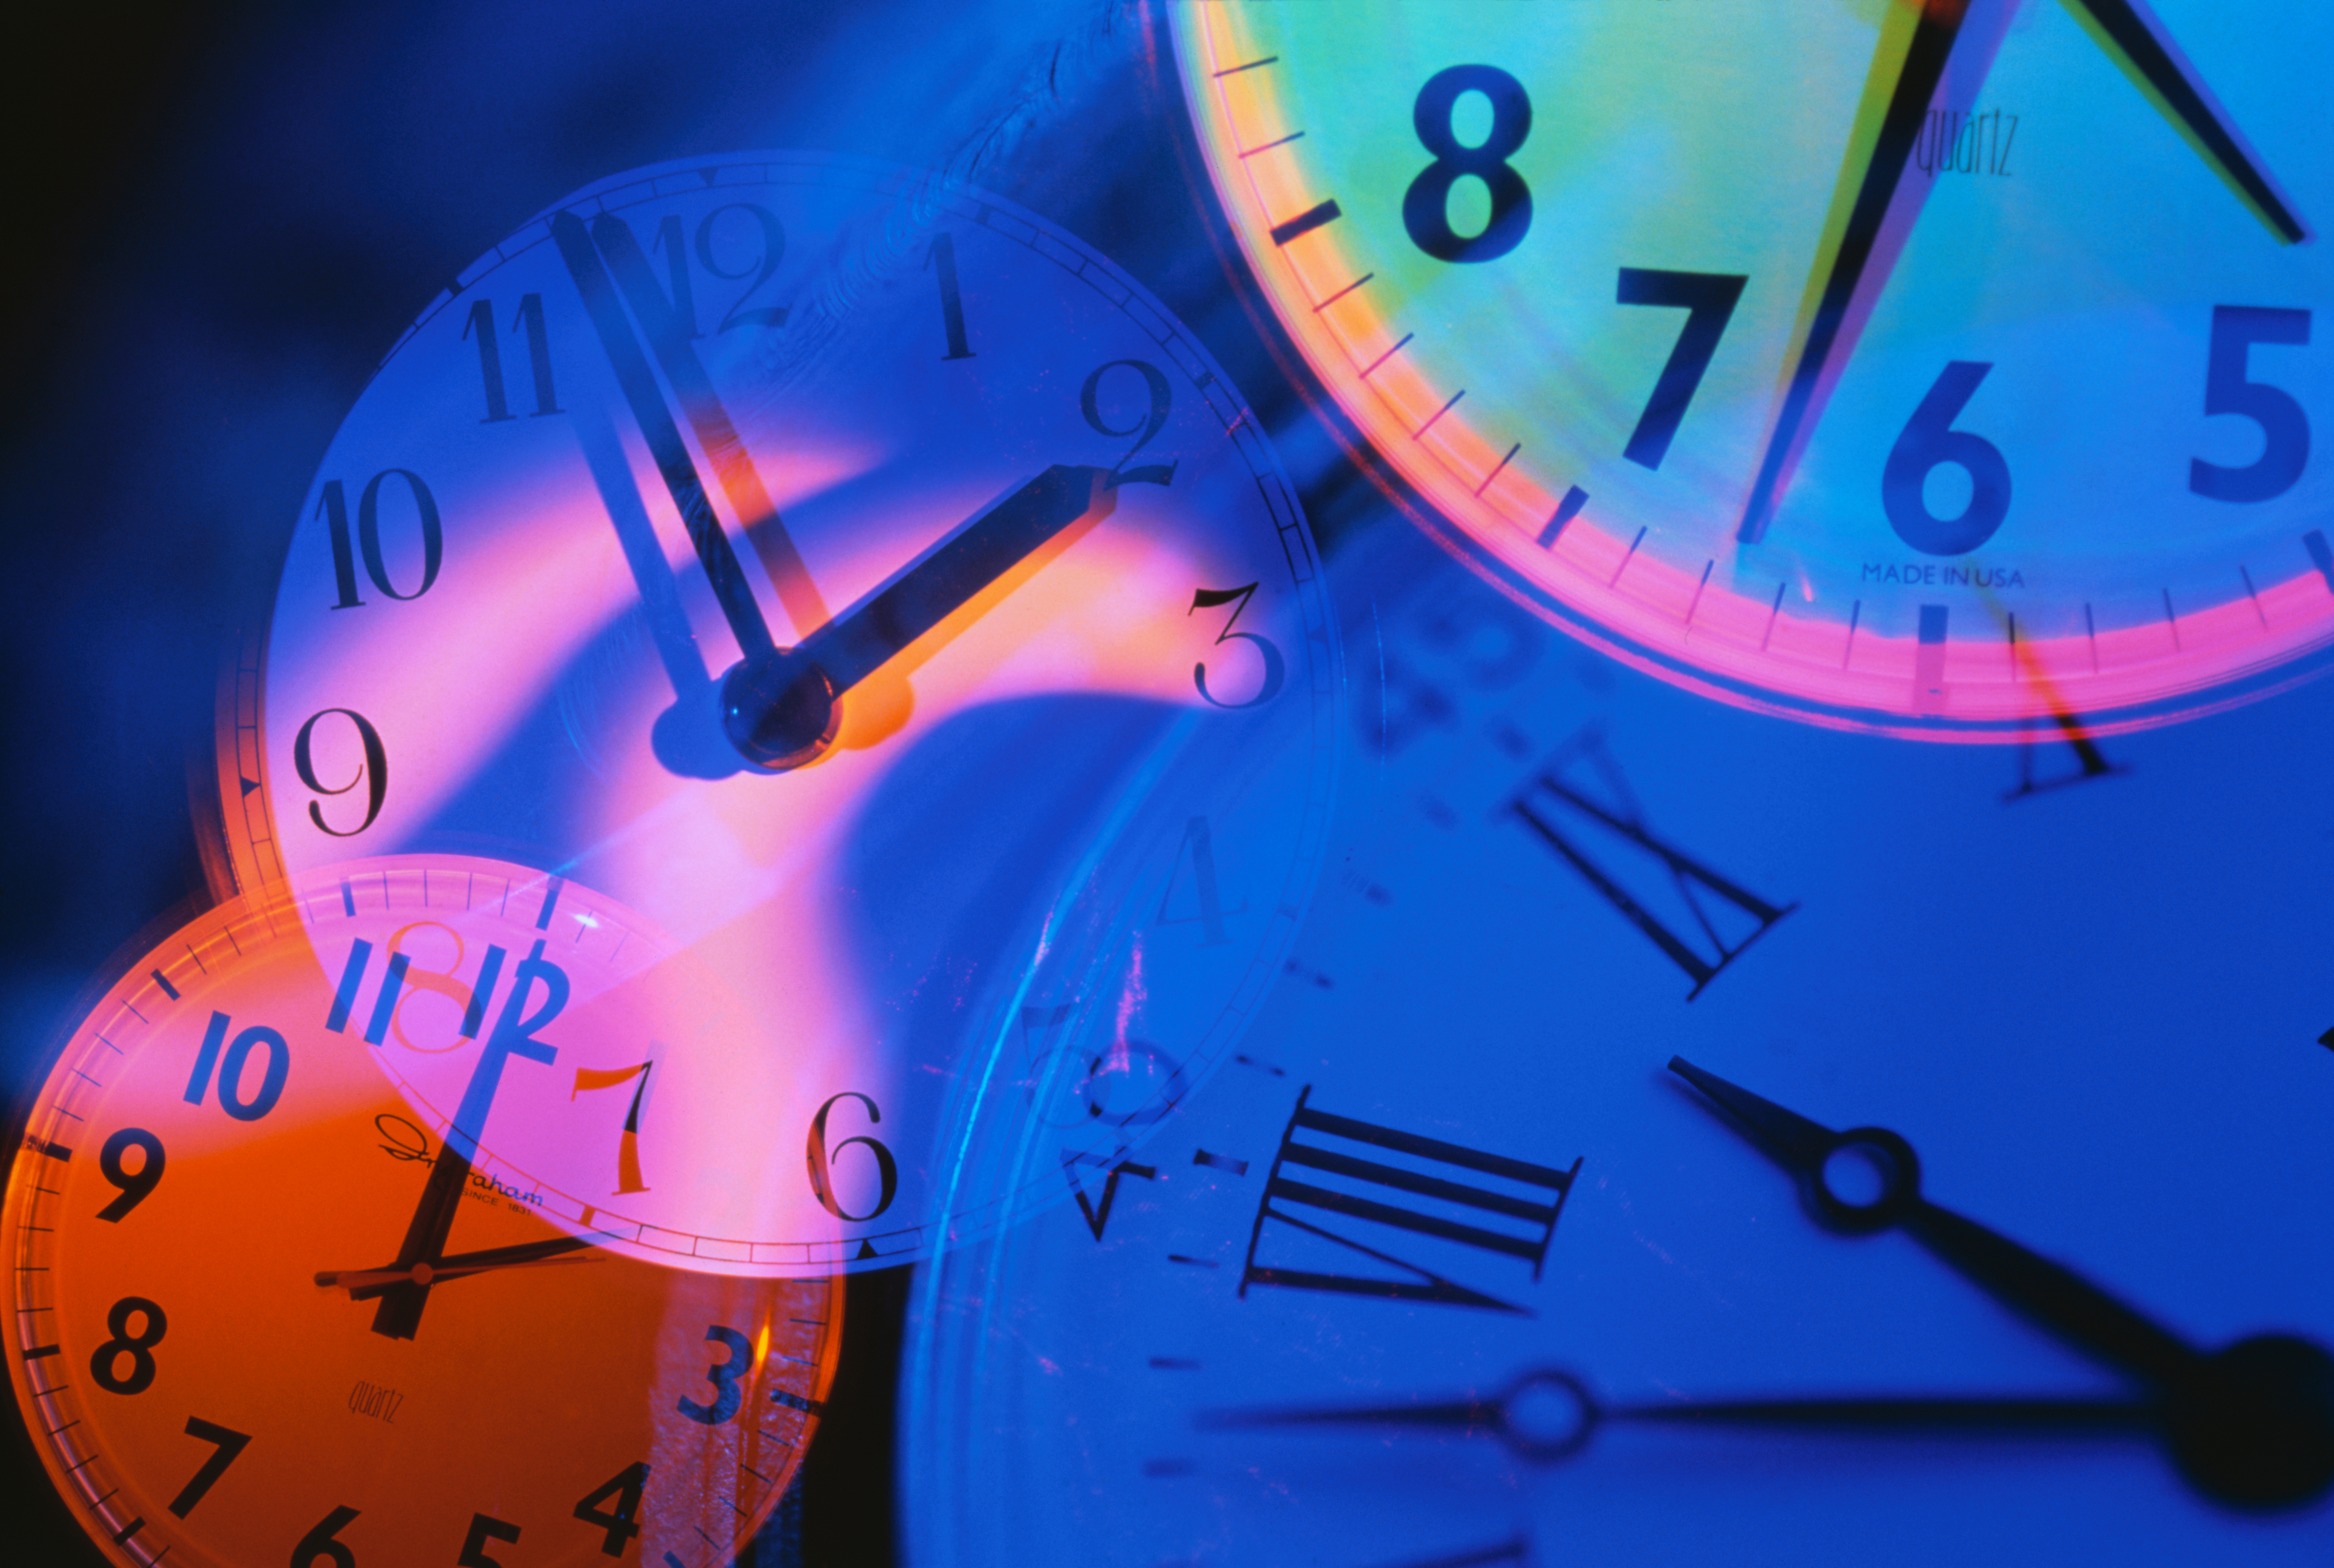 When do the clocks change around the world? And why?